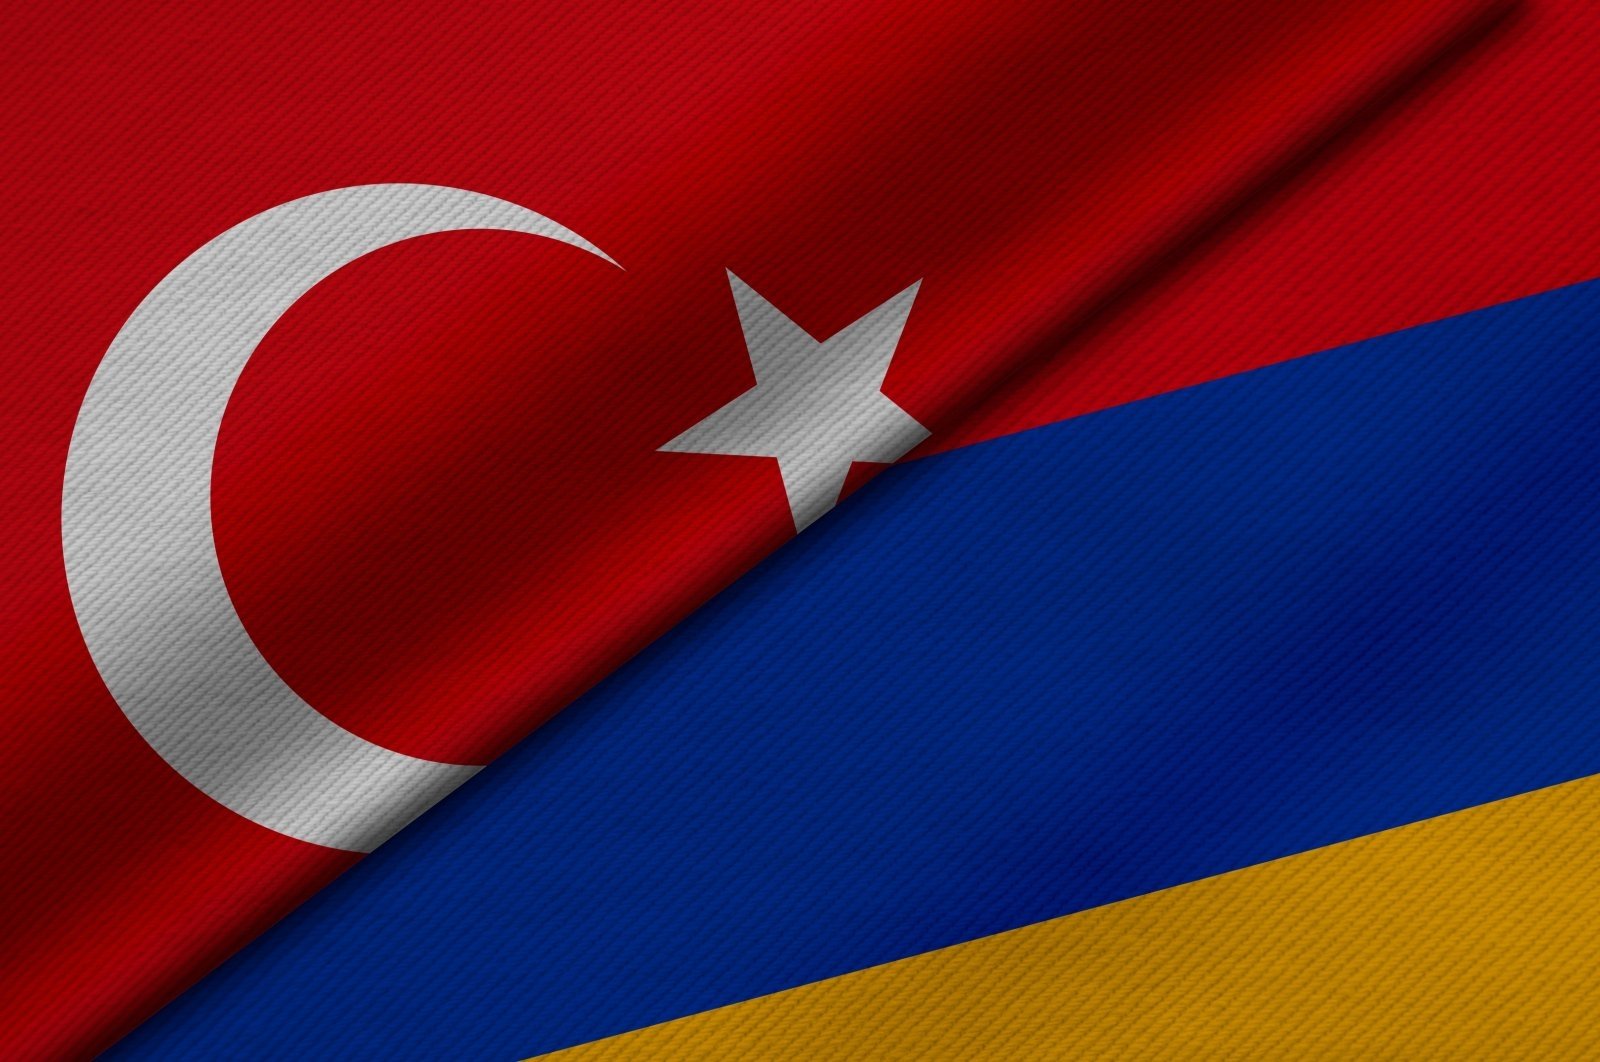 This illustration shows the flags of Türkiye and Armenia.